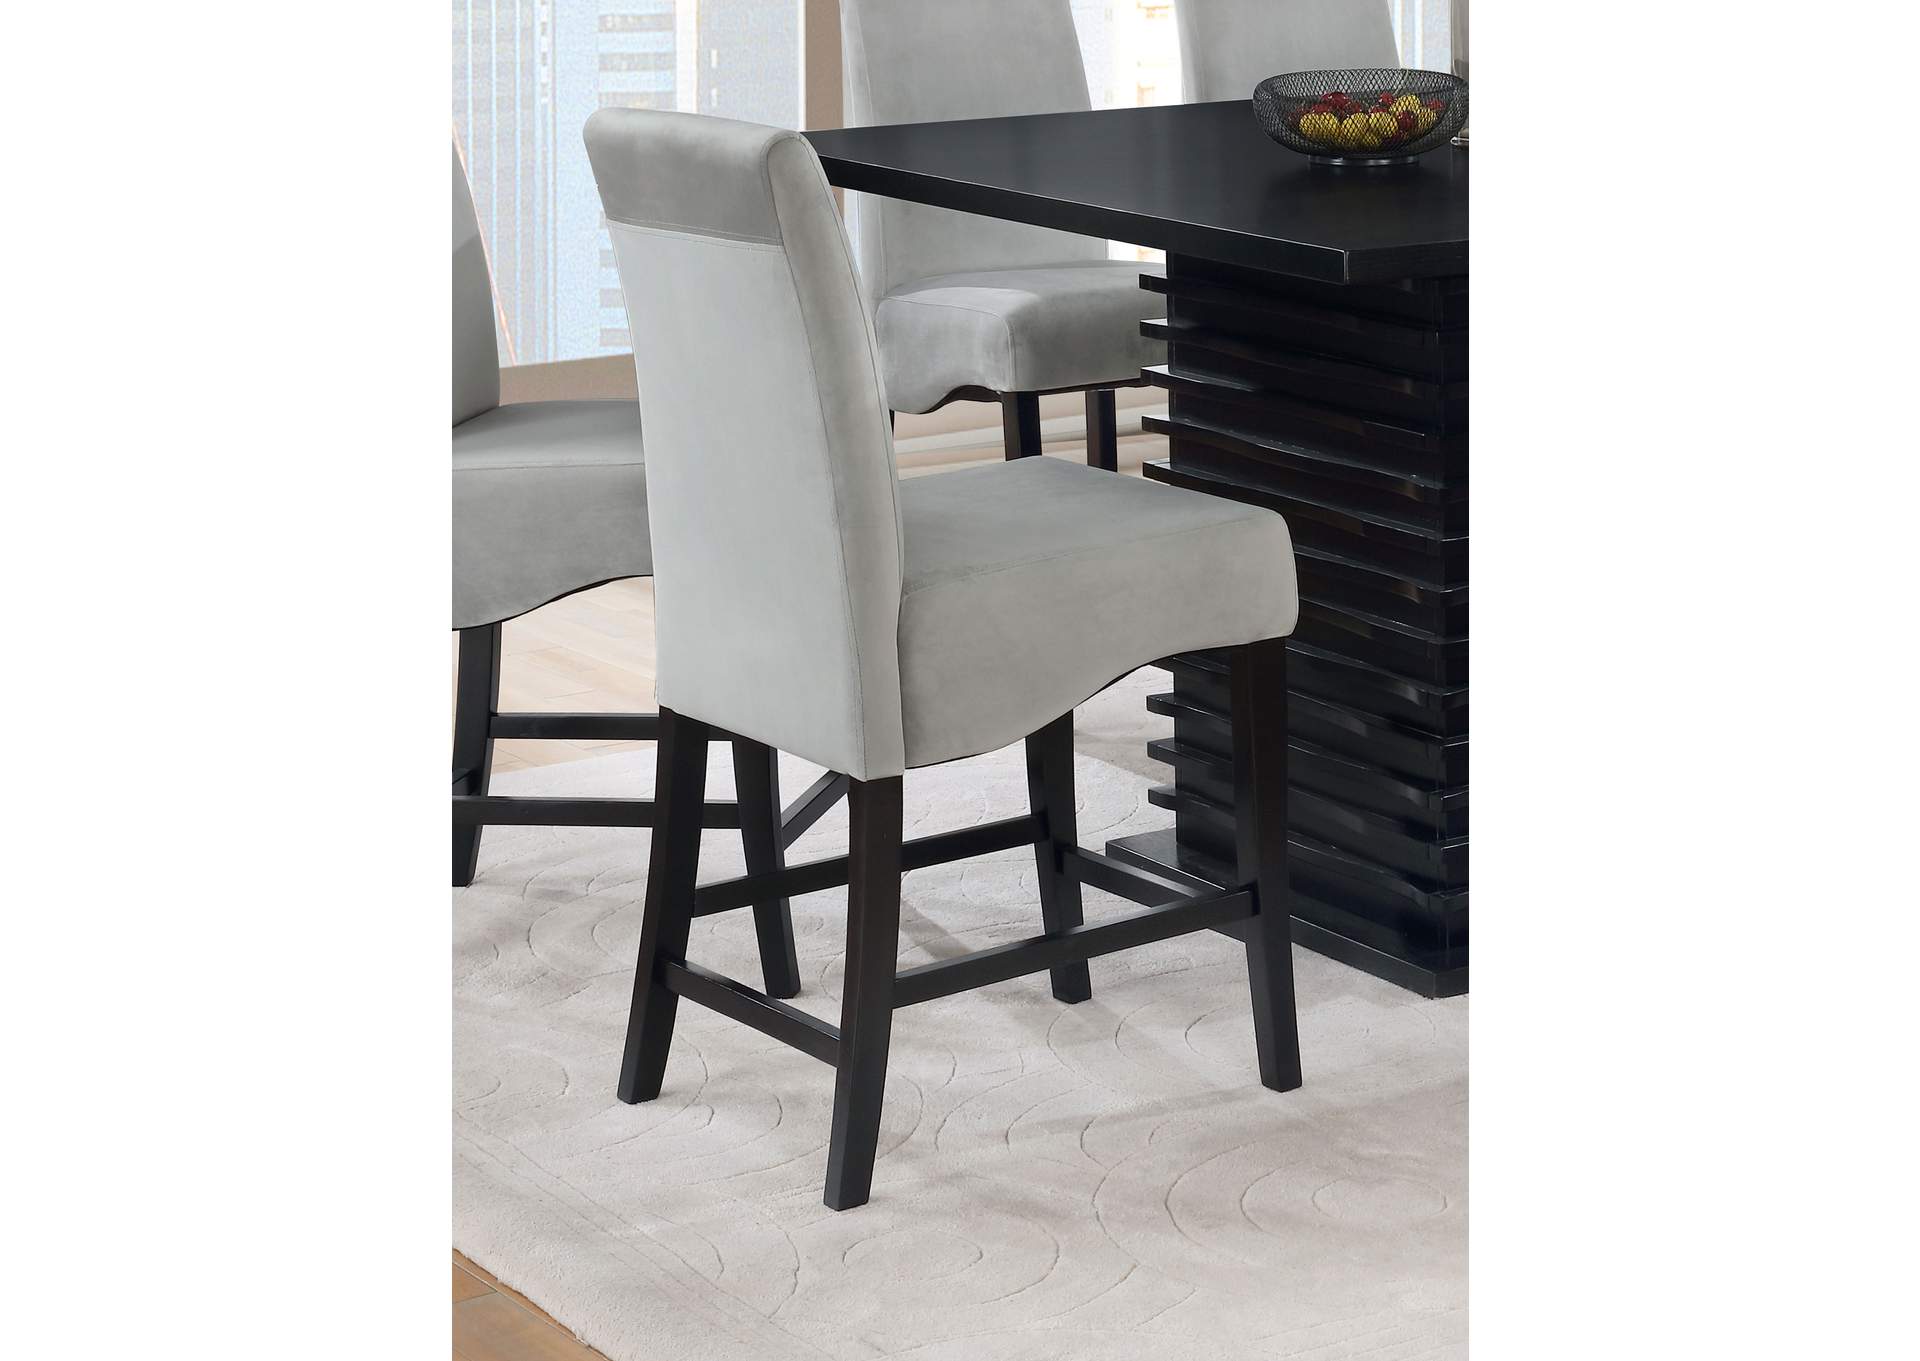 Stanton Upholstered Counter Height Chairs Grey and Black (Set of 2),Coaster Furniture